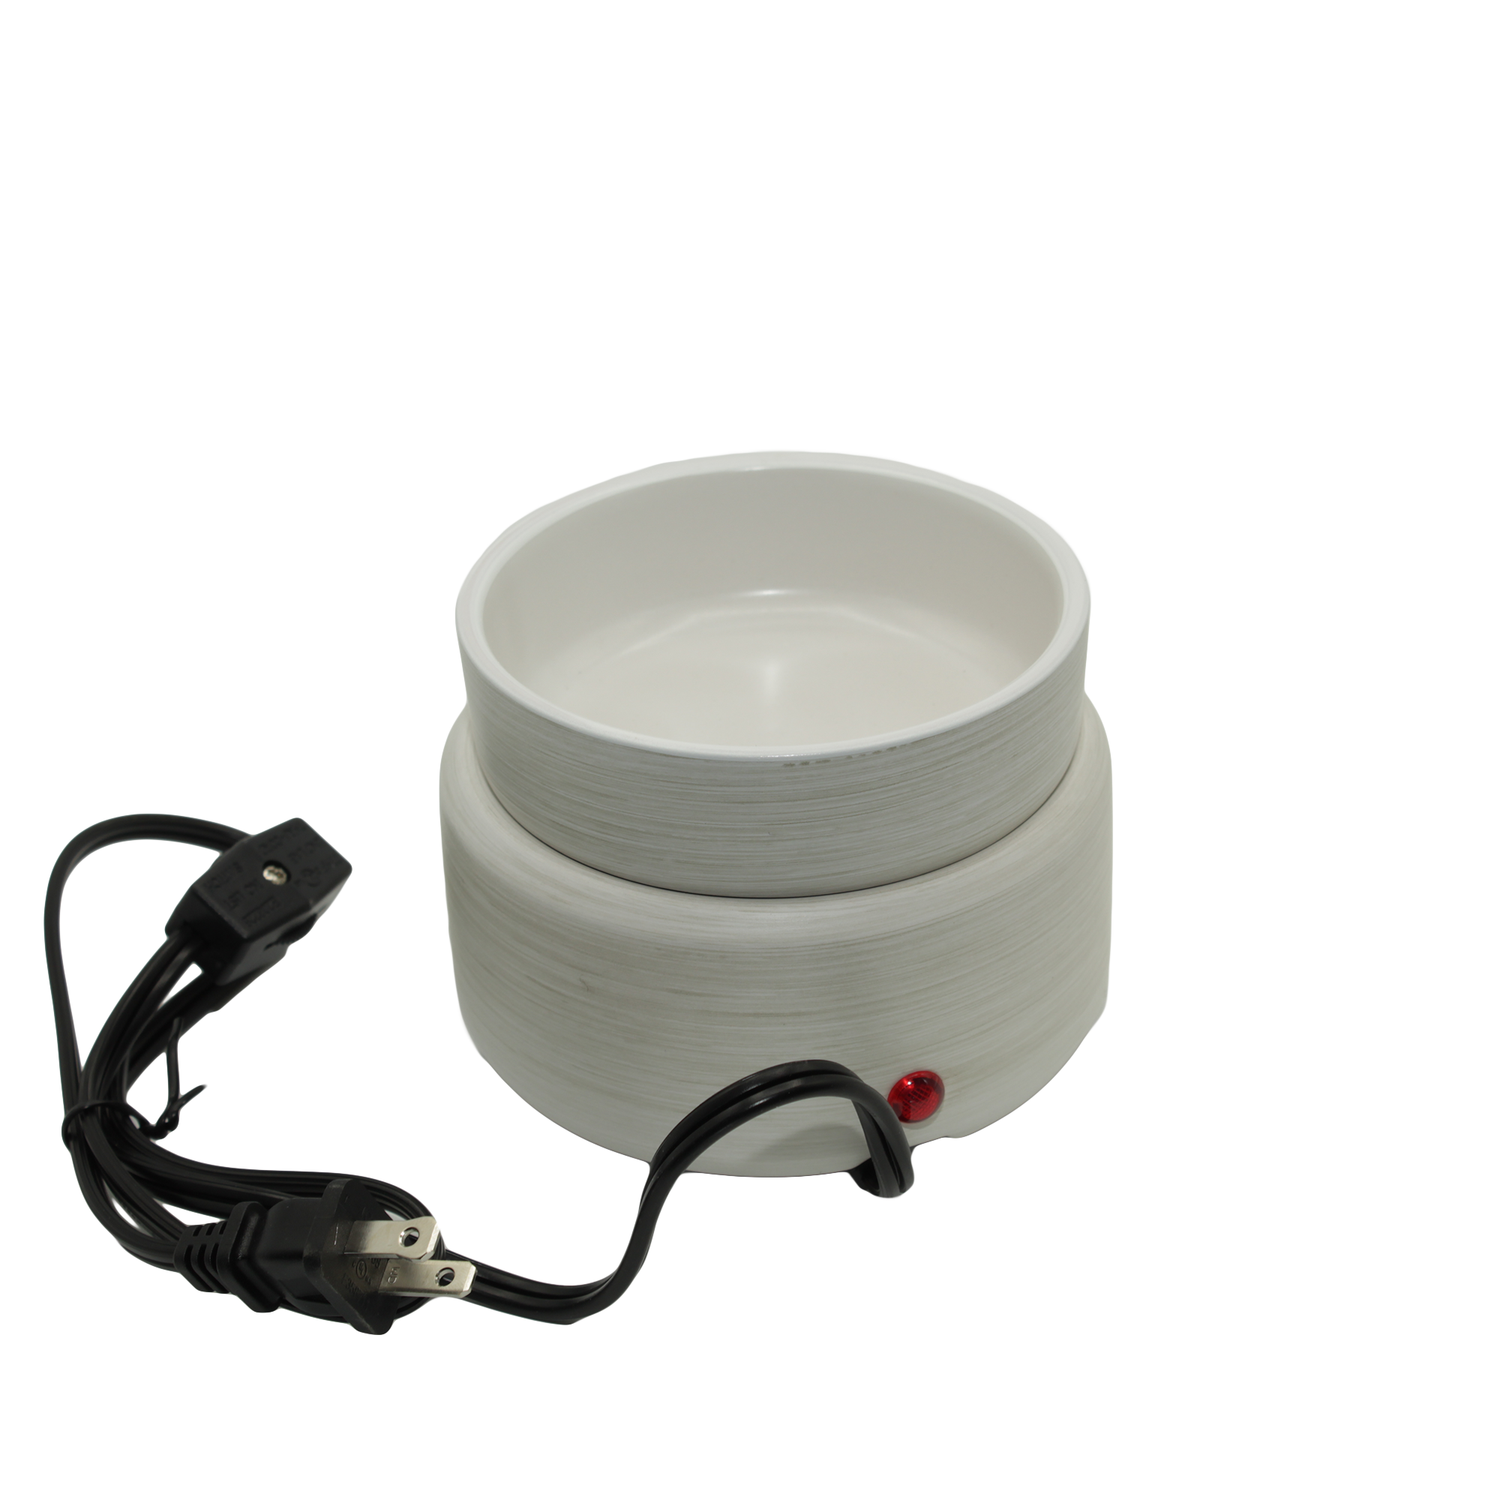 Candle Warmers Etc. Ironstone 2-in-1 Deluxe Wax Warmer - 9953503